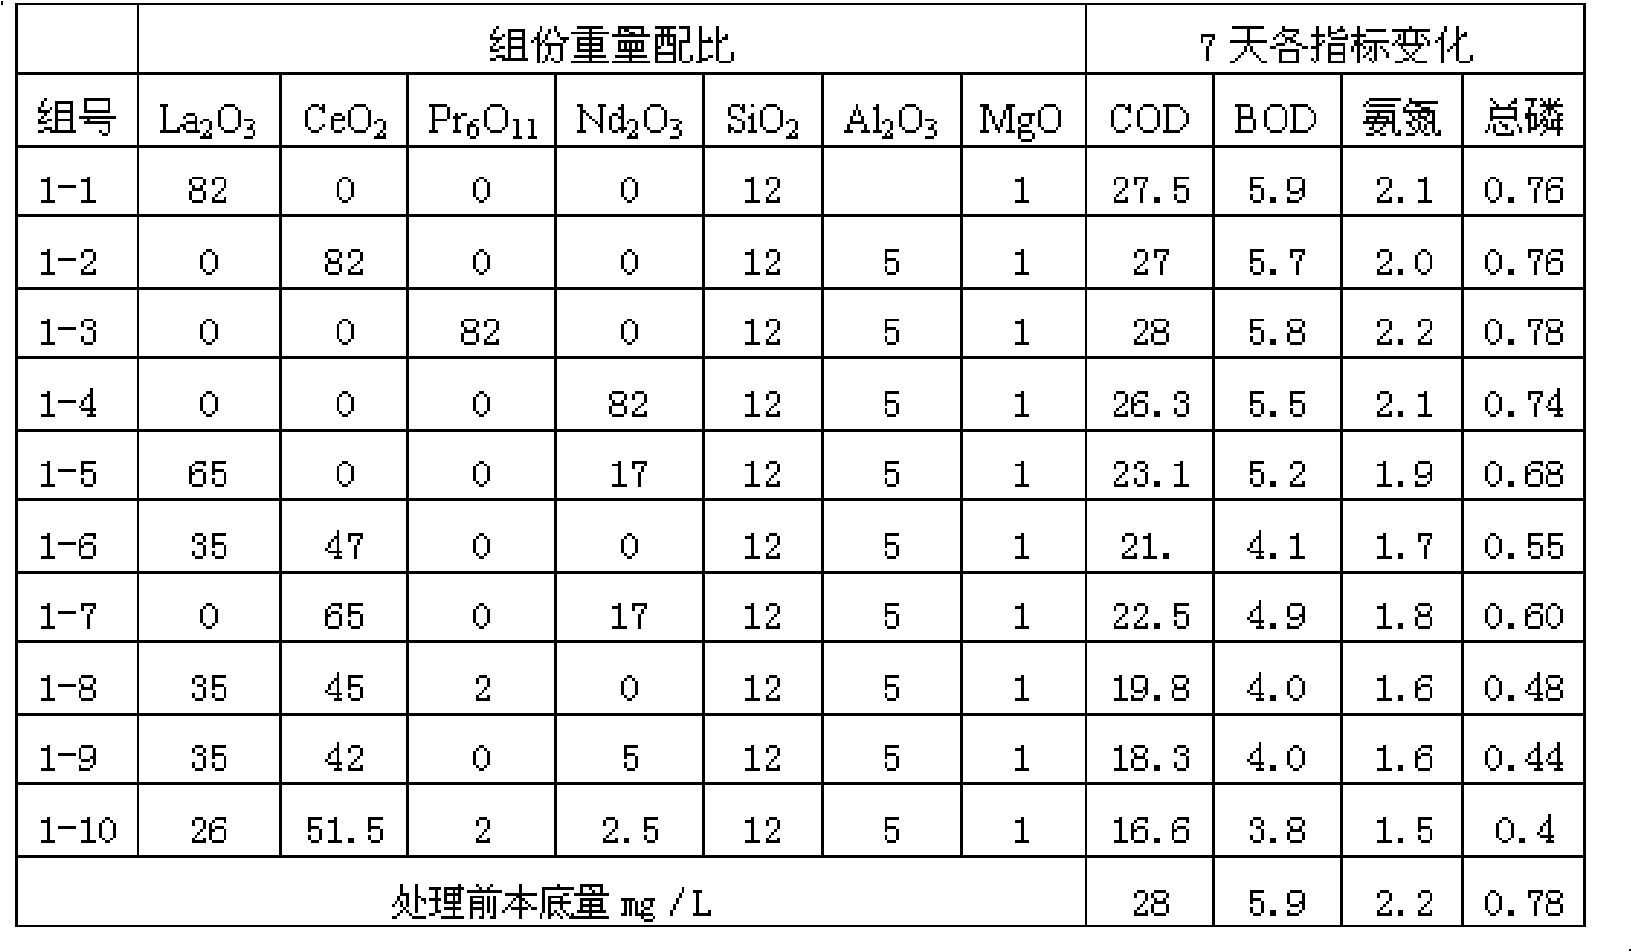 Lanthanide series water treatment agent and method of preparing the same